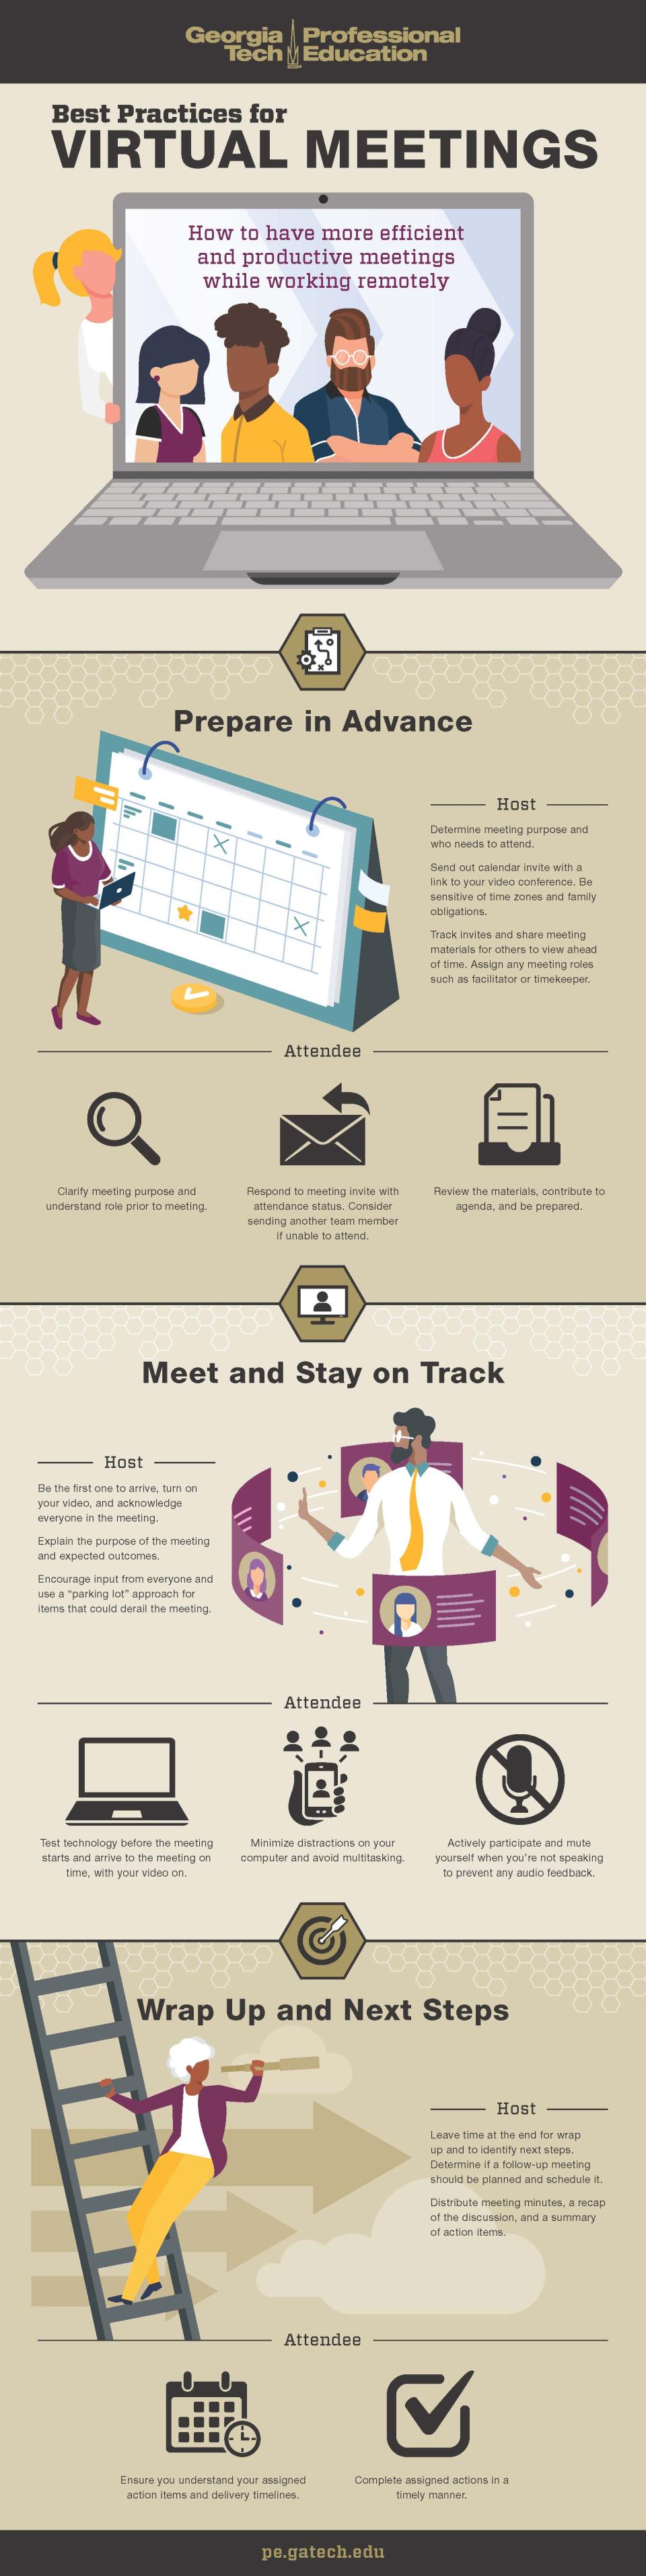 Infographic for best practices for virtual meetings